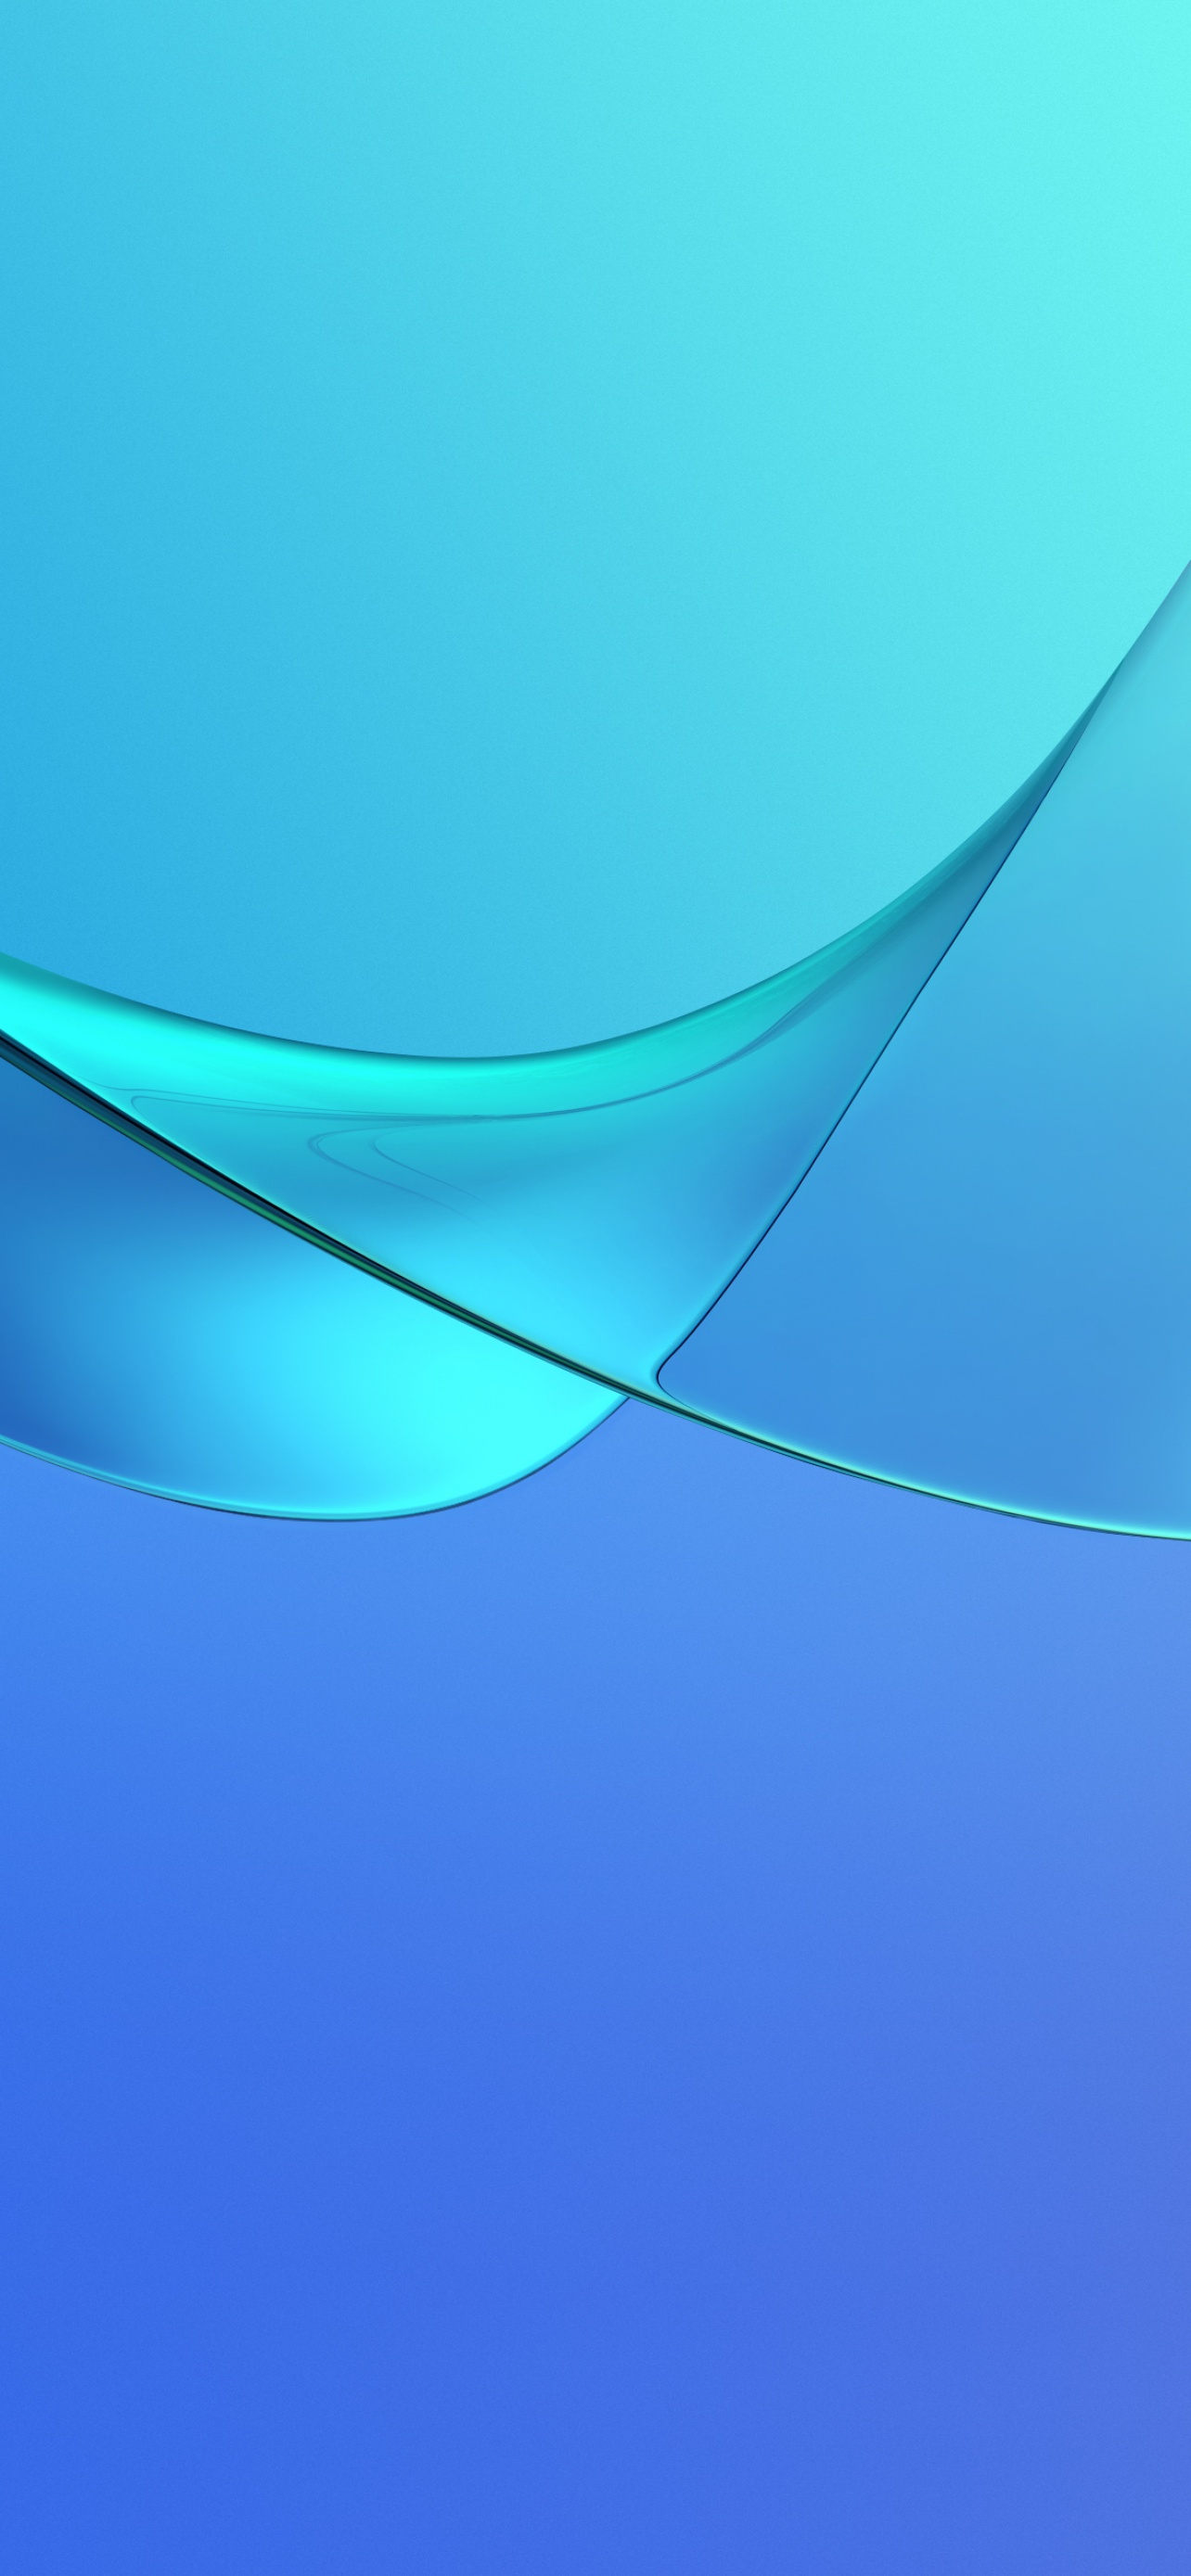 Waves Wallpaper 4K, Blue, Abstract